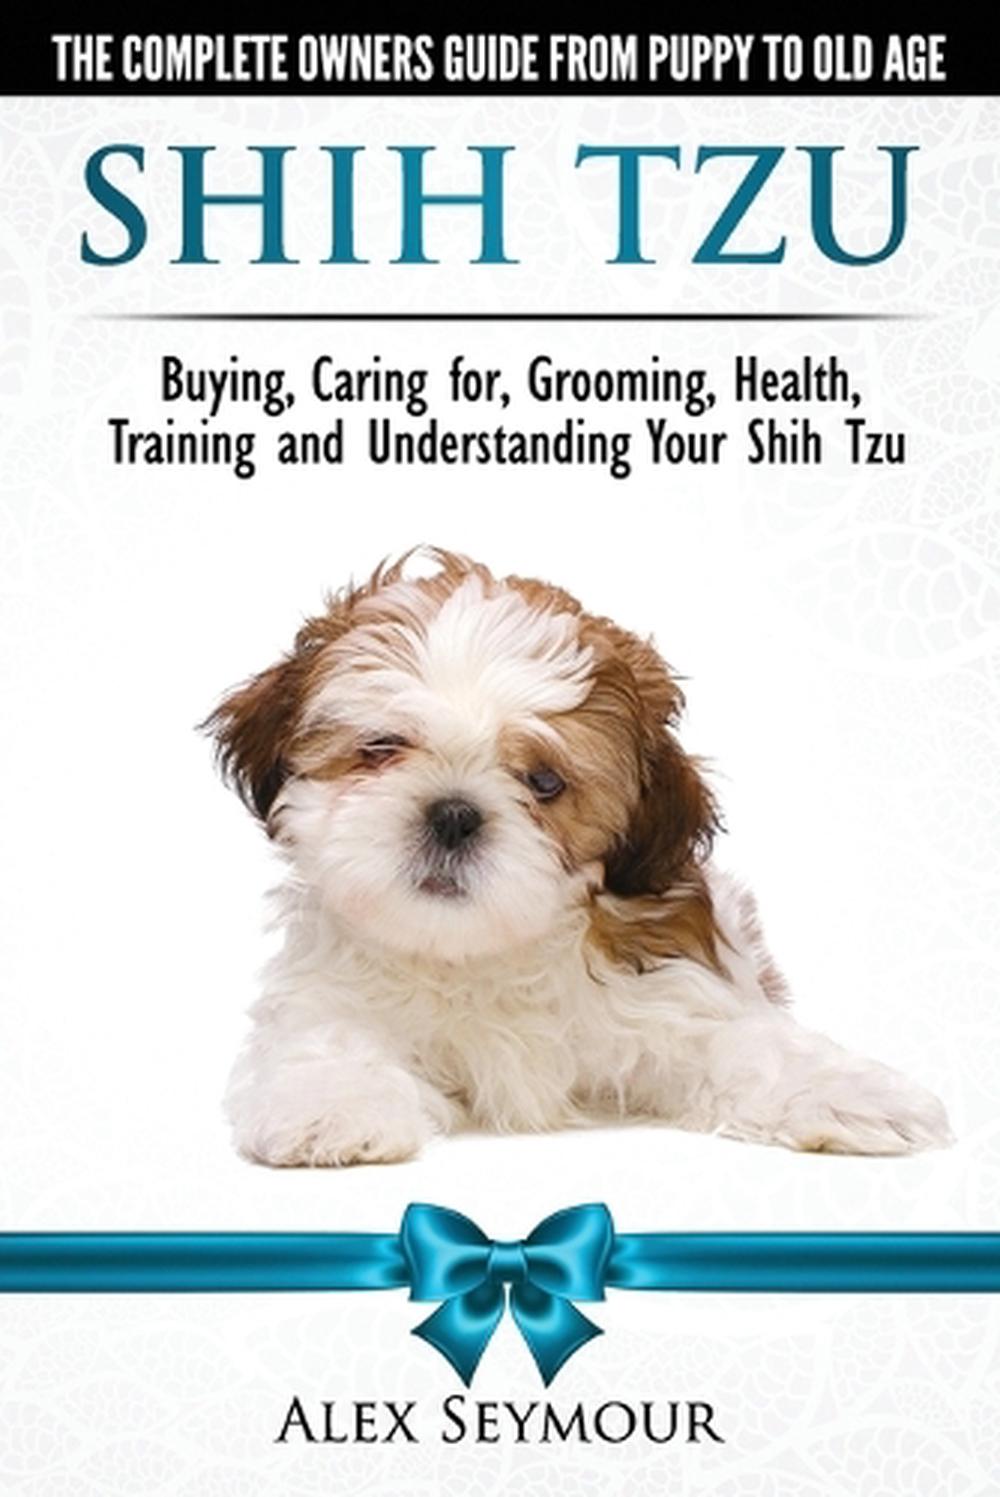 Shih Tzu Dogs The Complete Owners Guide from Puppy to